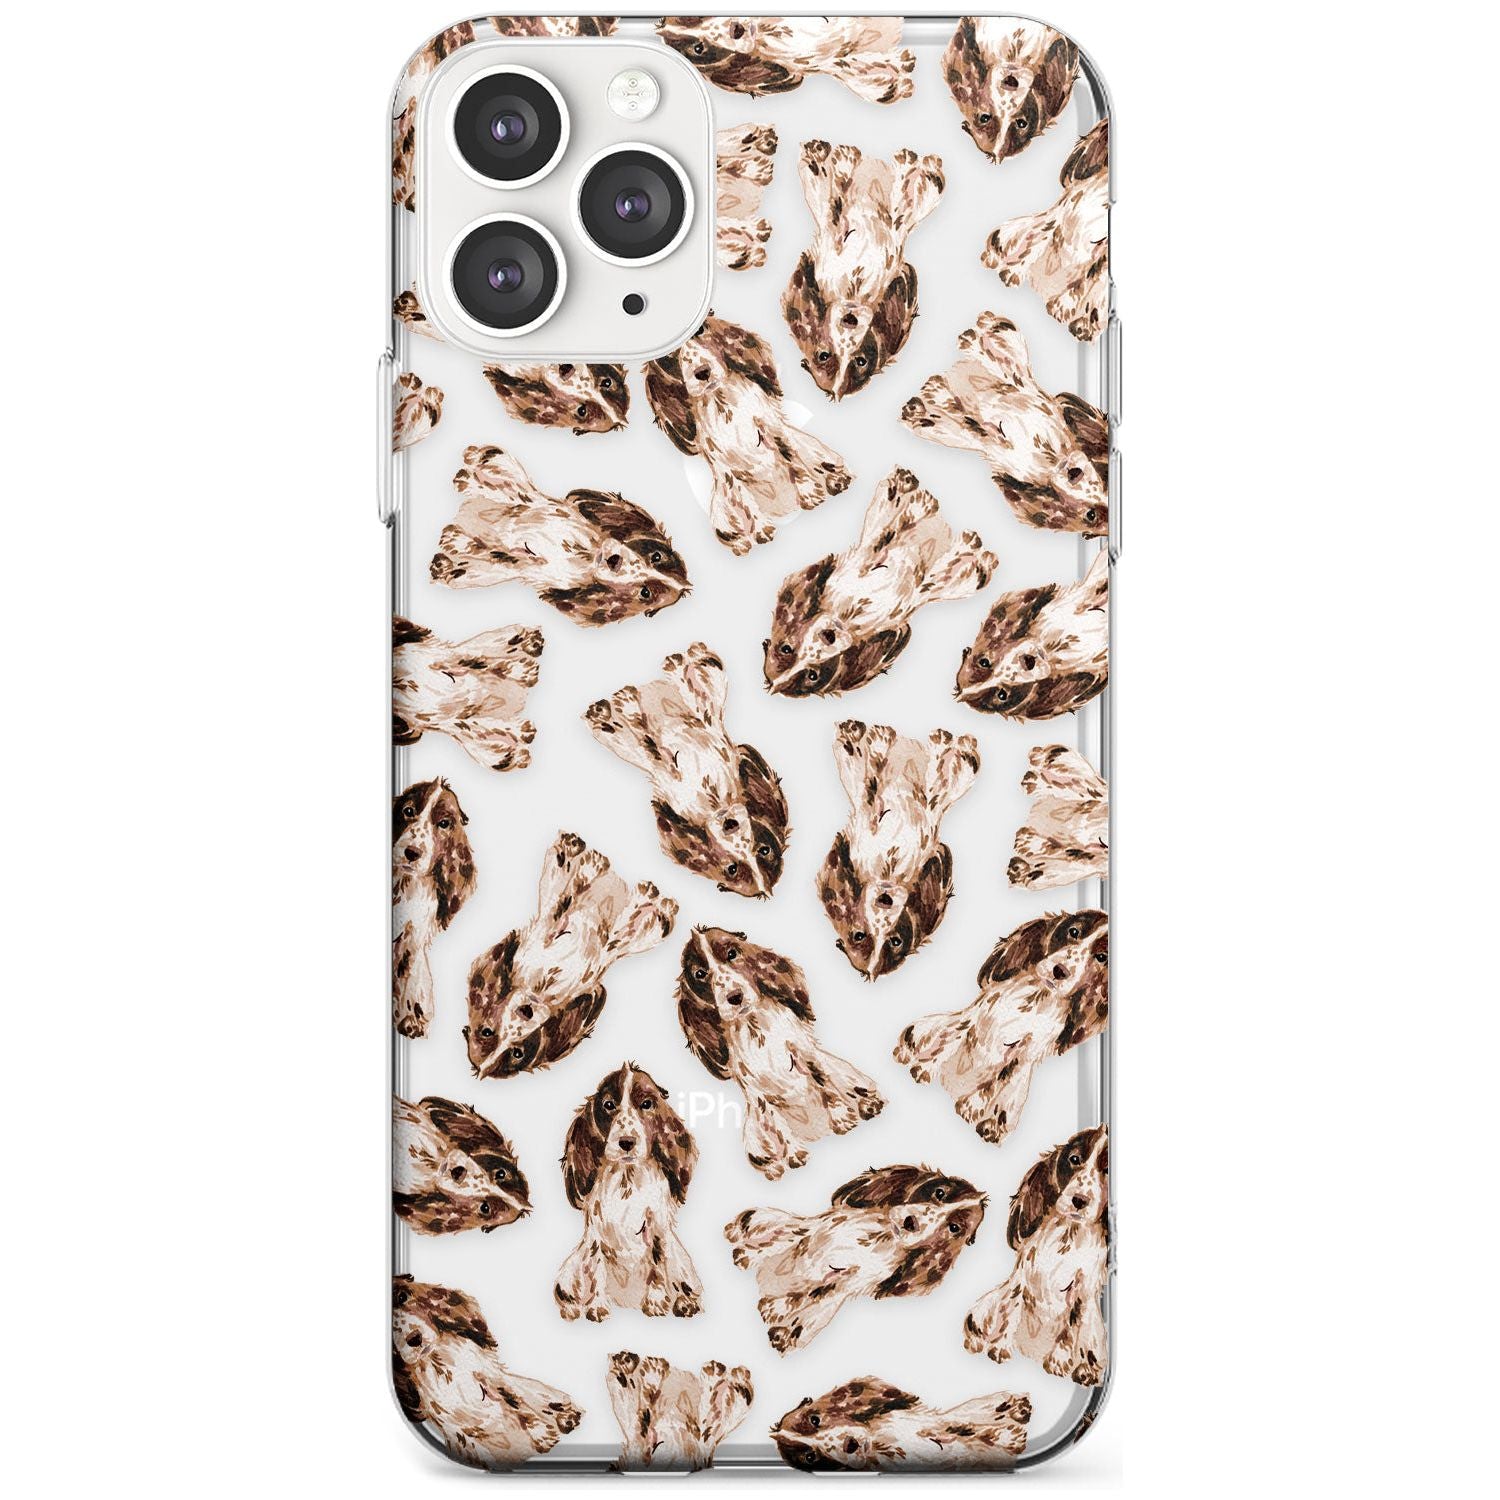 Cocker Spaniel (Brown) Watercolour Dog Pattern Phone Case iPhone 11 Pro Max / Clear Case,iPhone 11 Pro / Clear Case,iPhone 12 Pro Max / Clear Case,iPhone 12 Pro / Clear Case Blanc Space